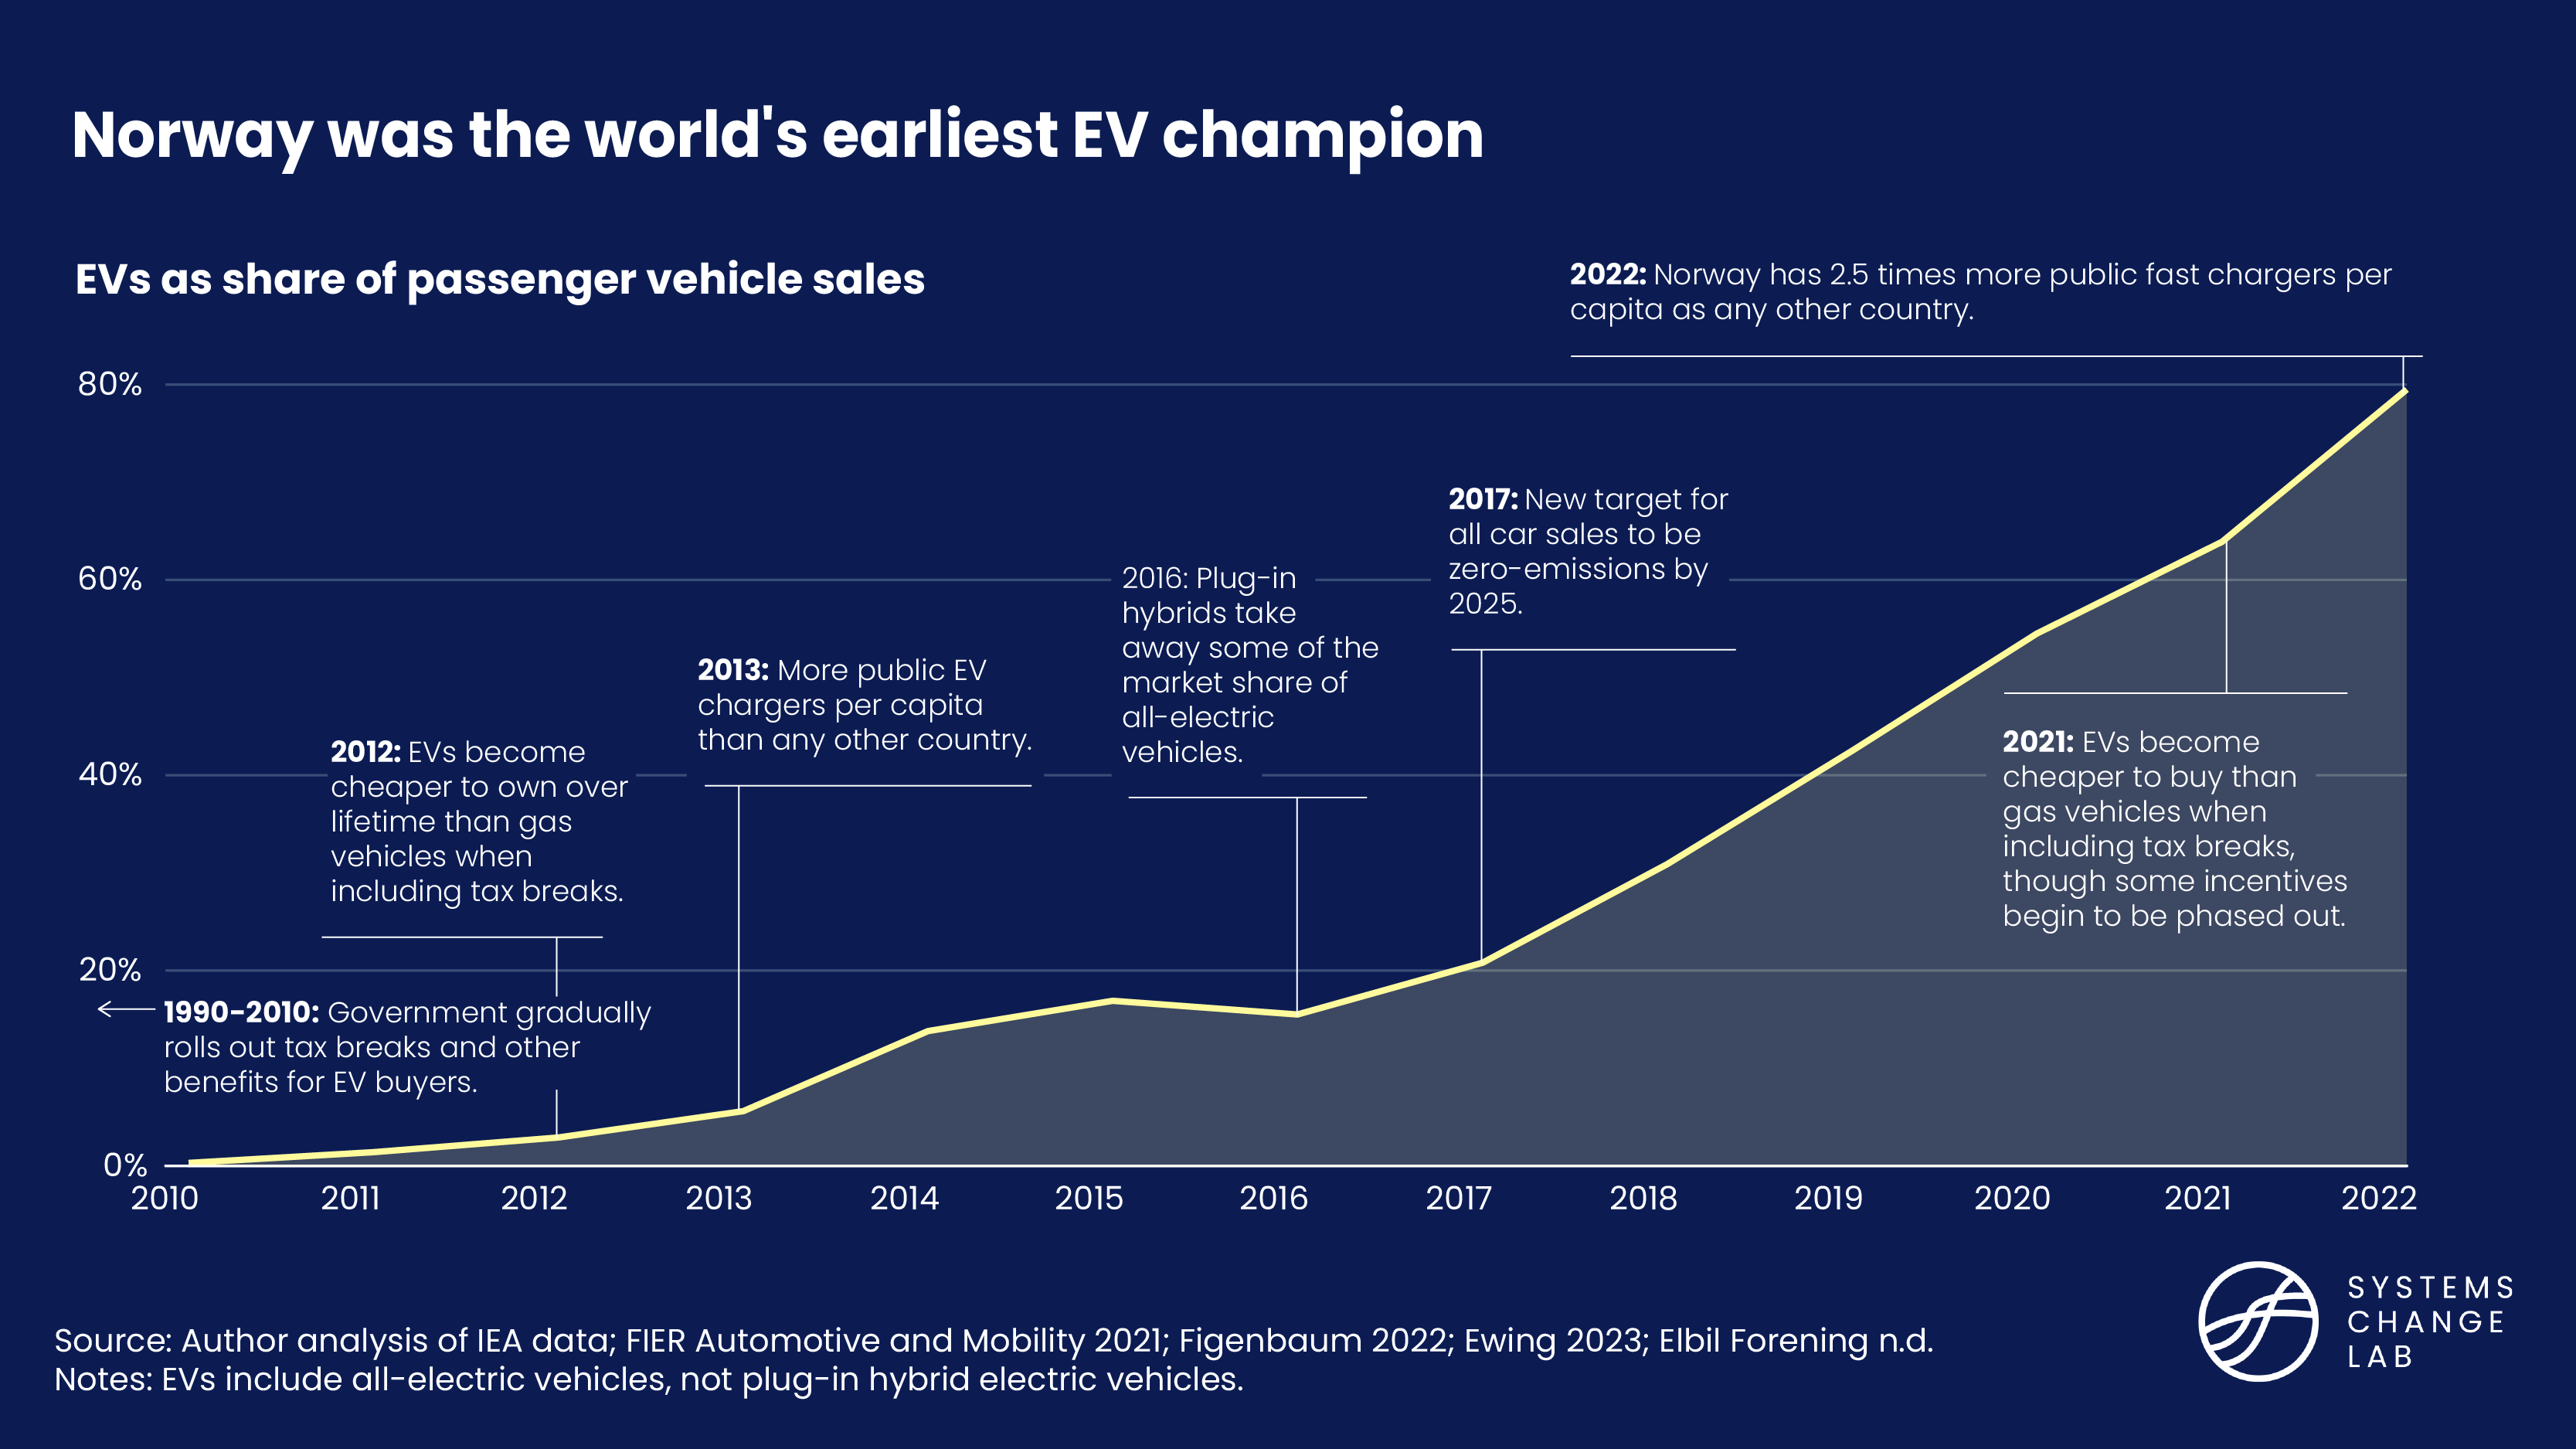 Norway was the world's earliest EV champion